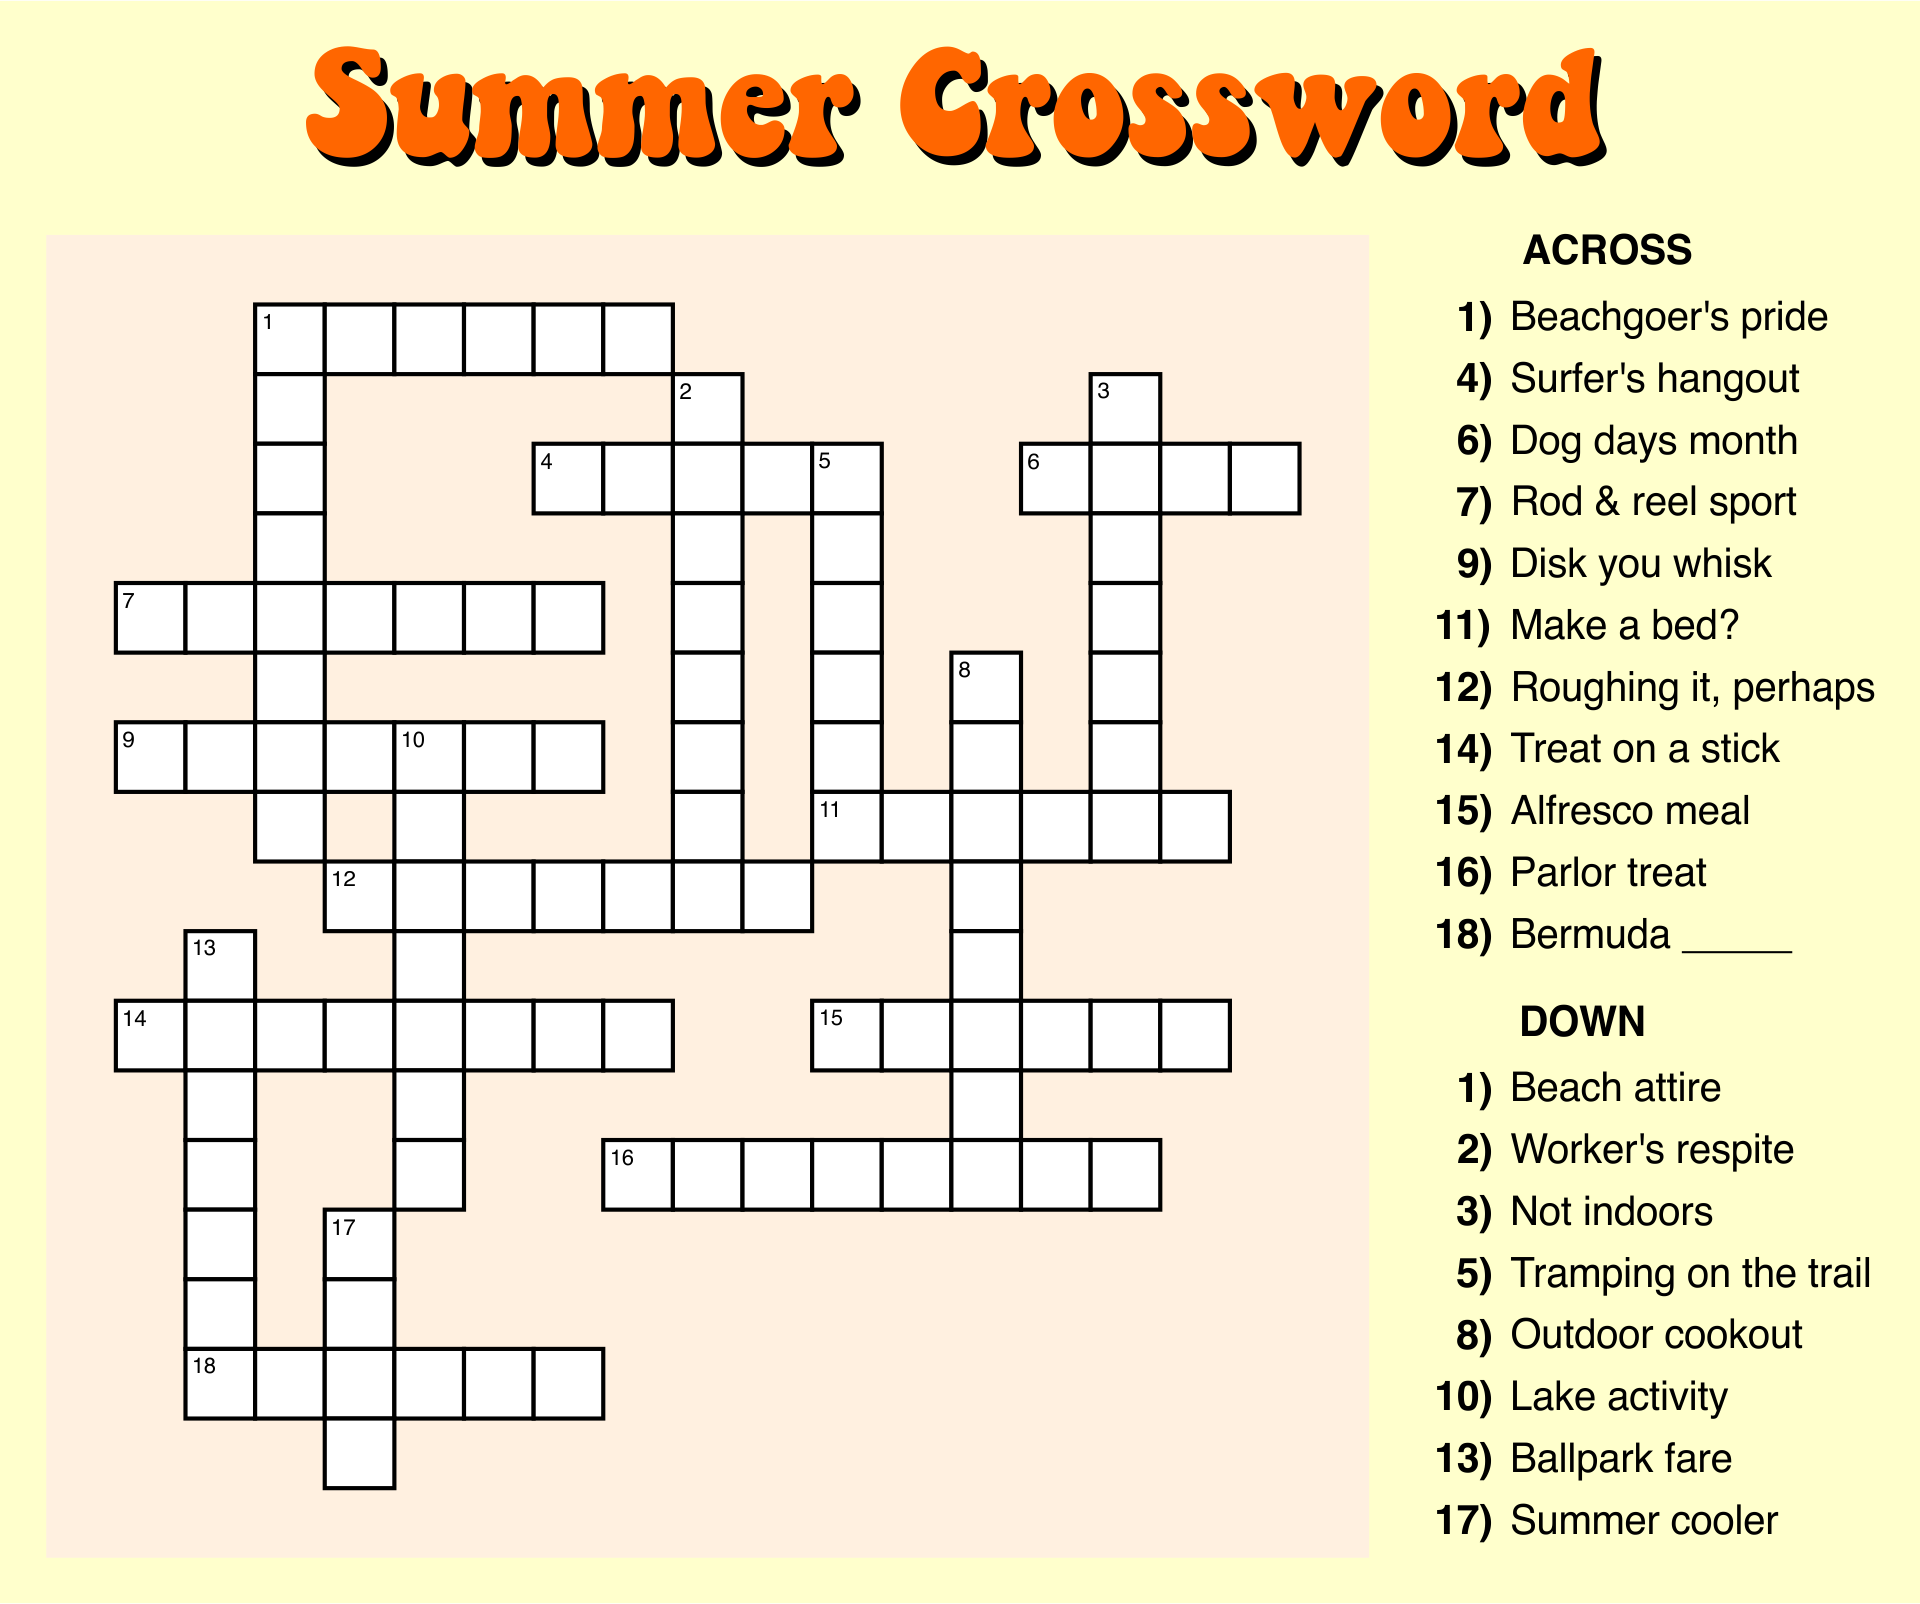 What kind of printer needed for large crossword puzzles? 